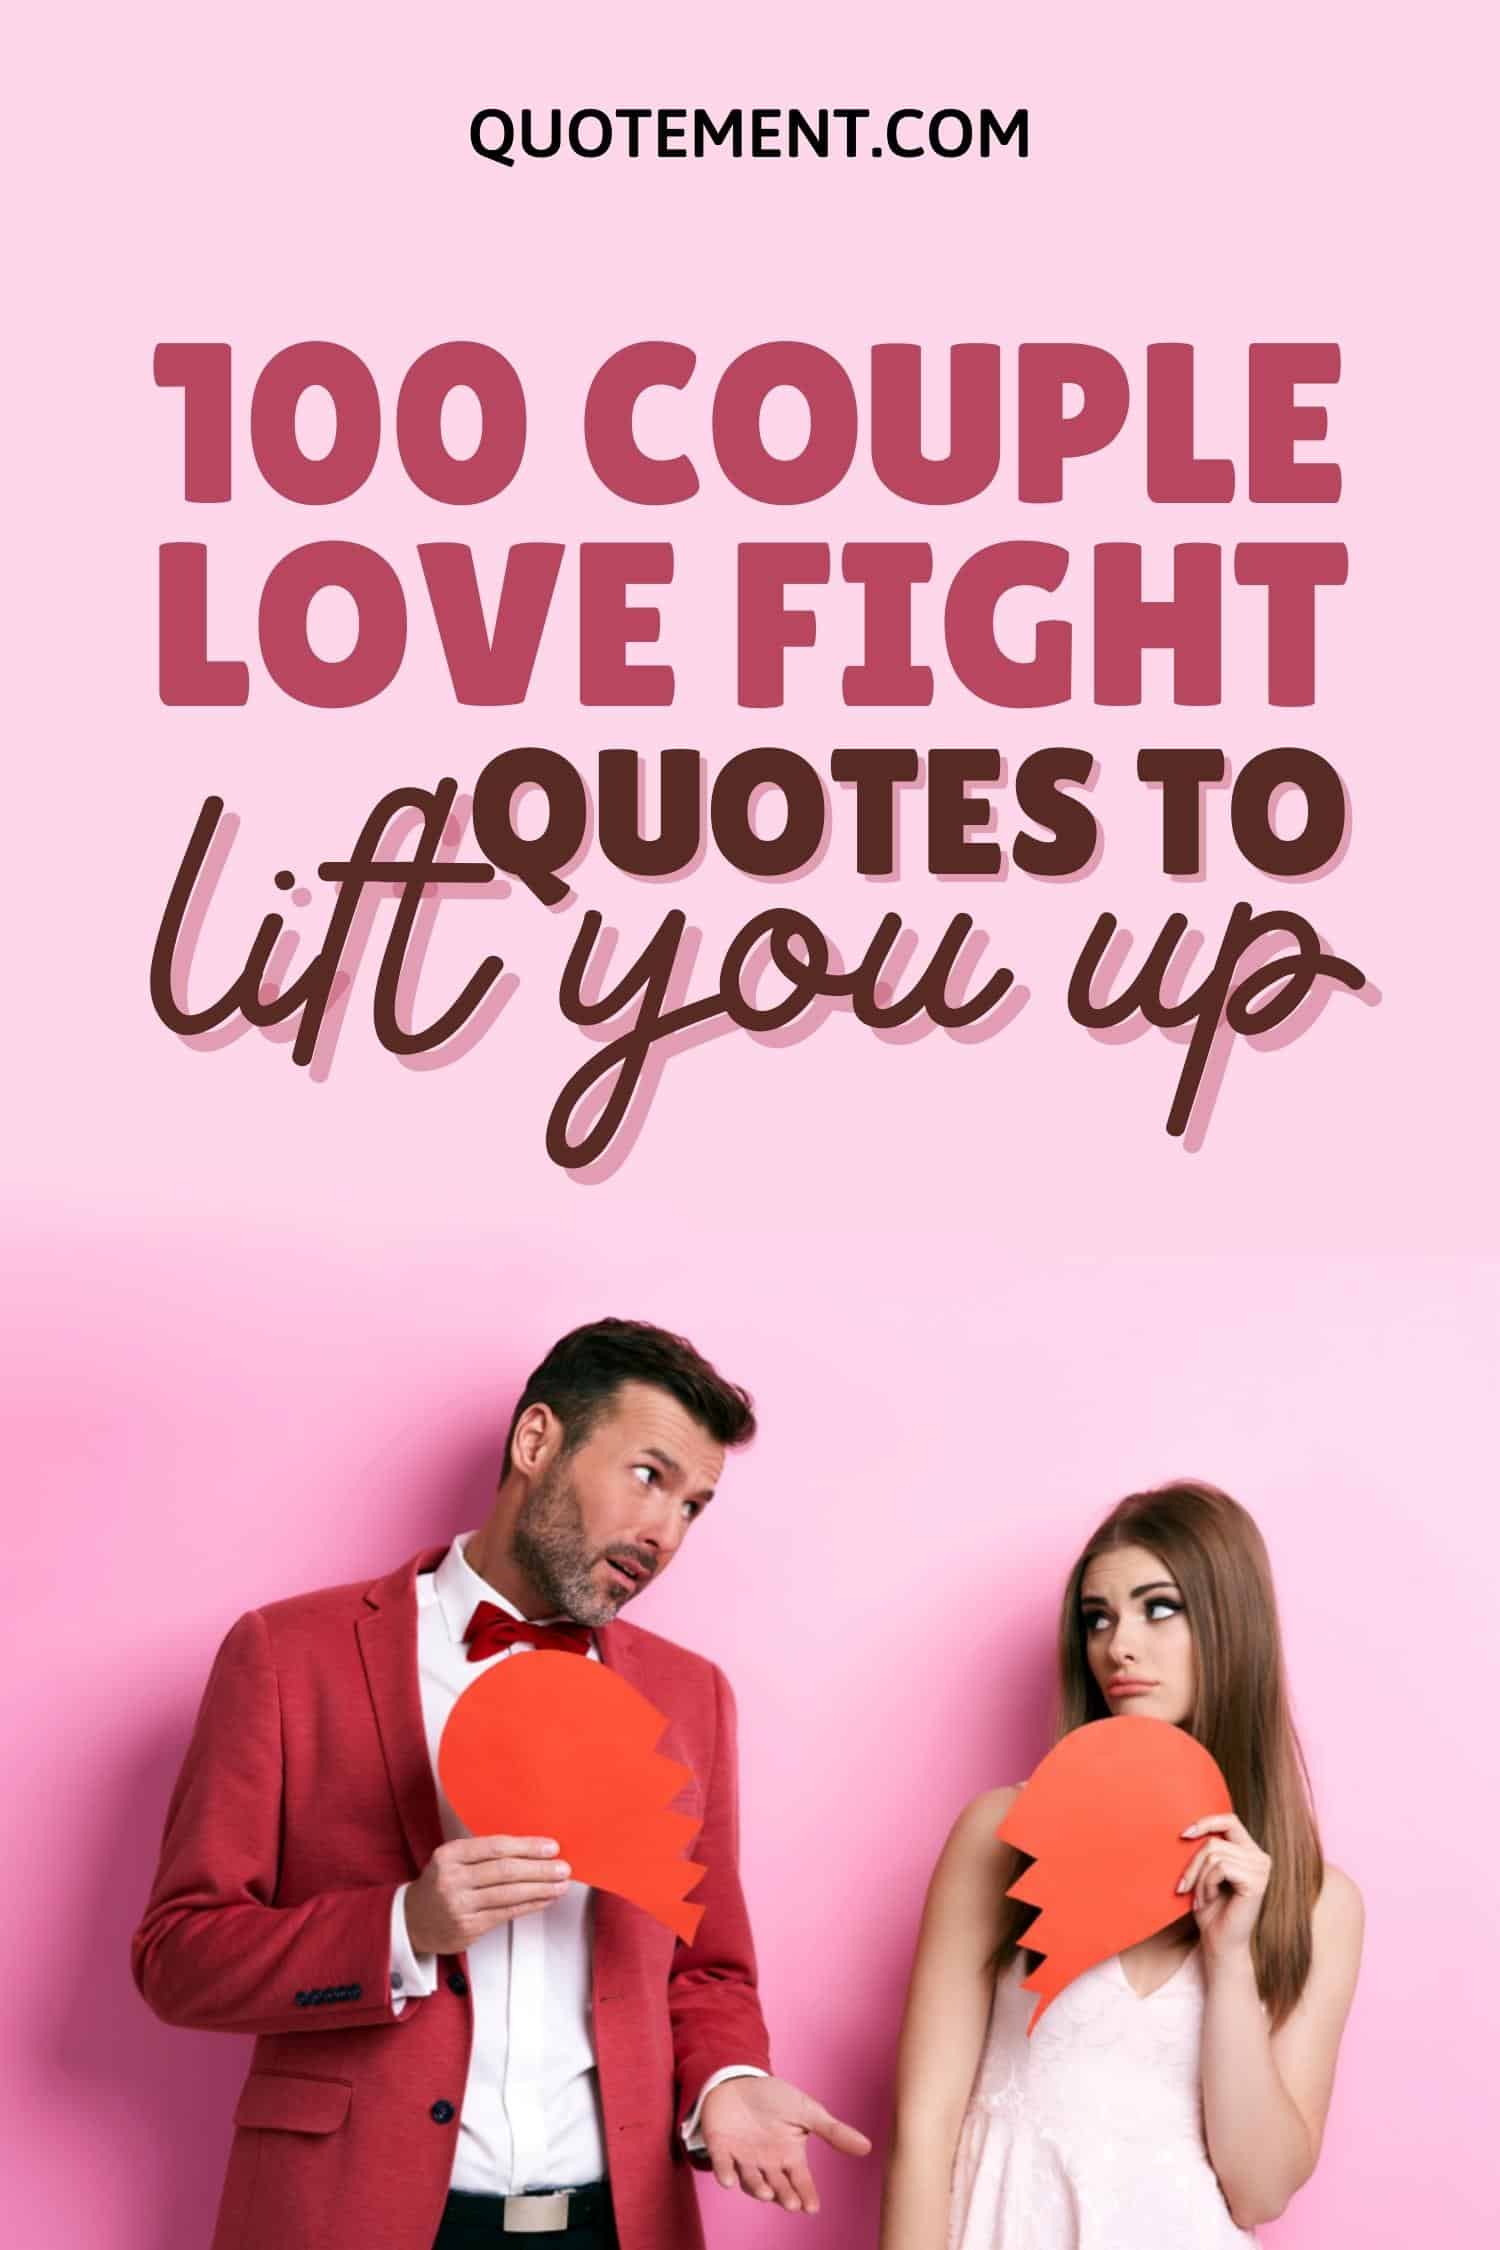 100 Couple Love Fight Quotes To Share With Your Partner